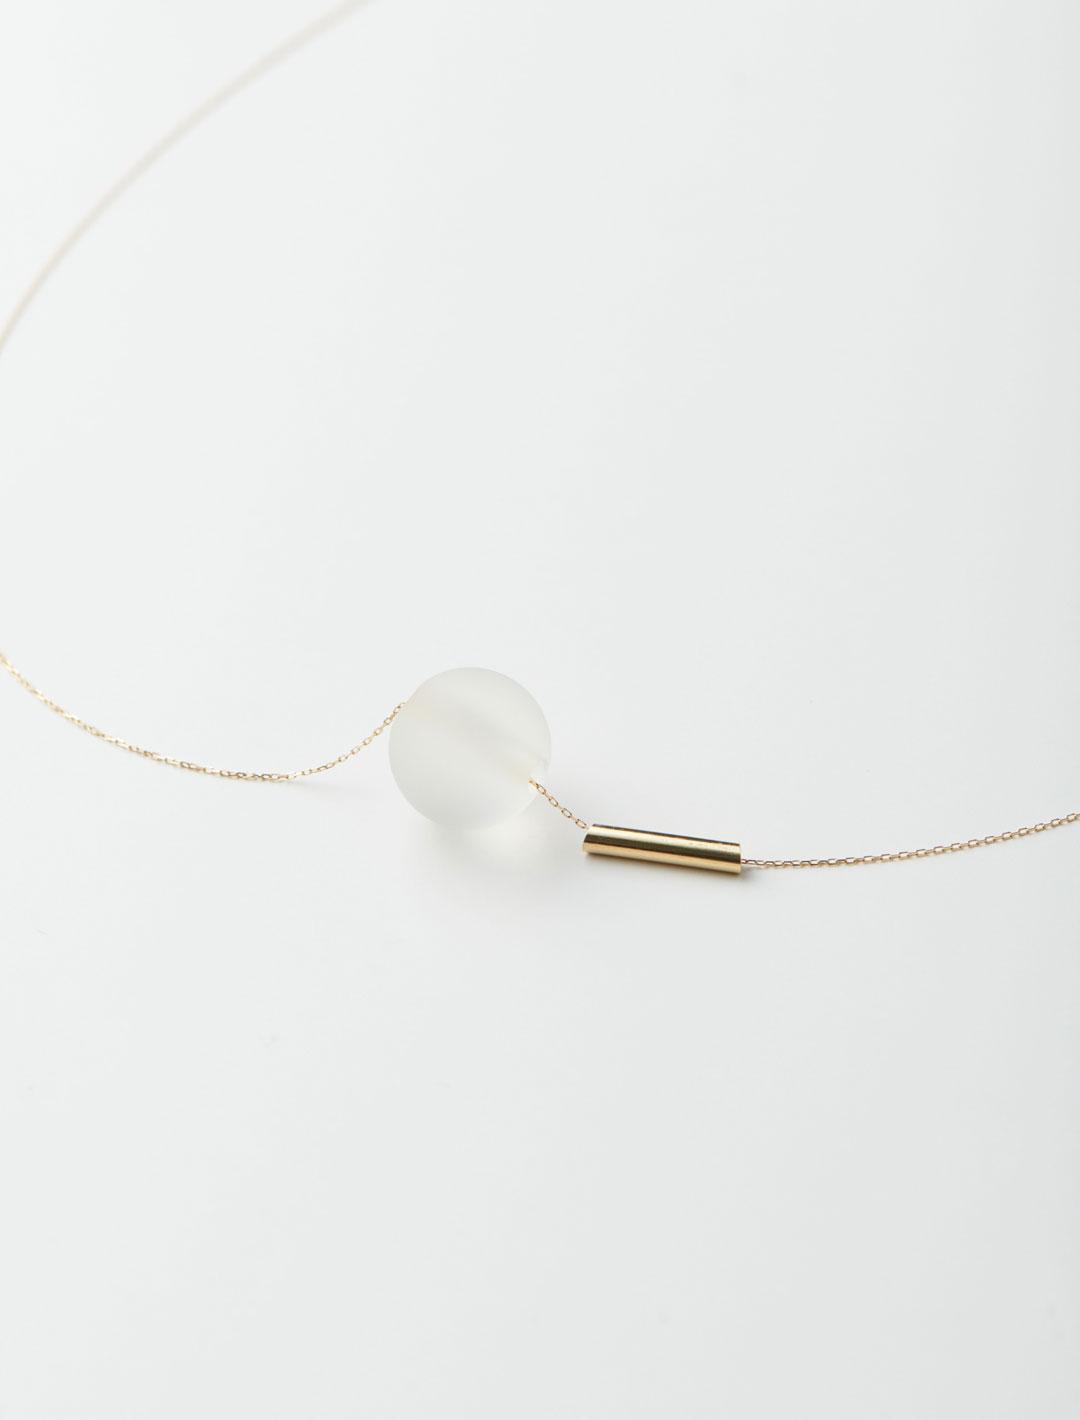 gyoku Necklace S 45cm - Yellow Gold